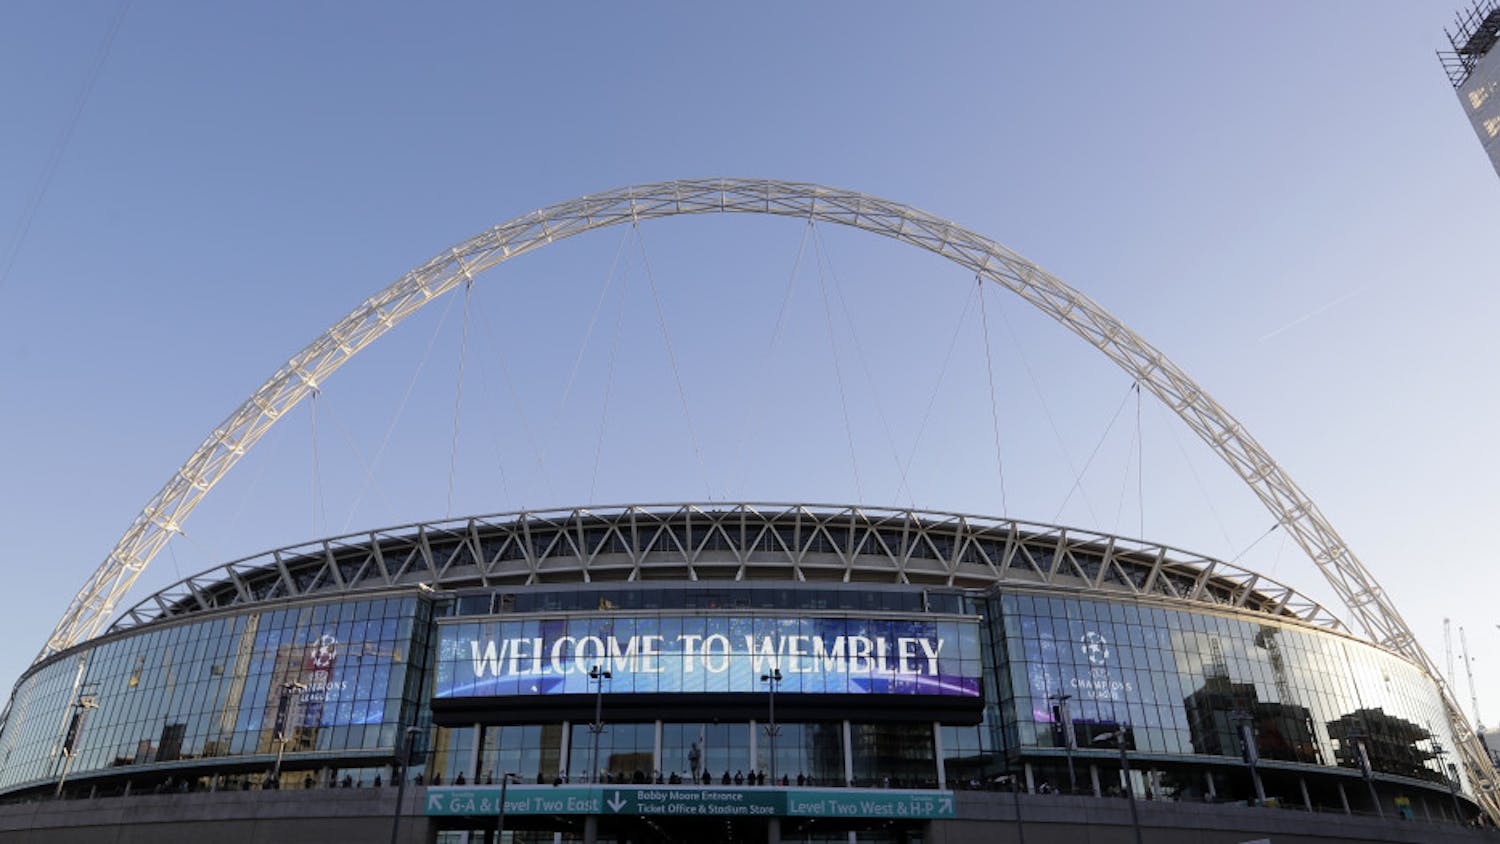 FILE - This Oct. 3, 2018 file photo shows a view of the exterior of Wembley Stadium in London. The Jacksonville Jaguars will play two home games in London next season, strengthening the franchise’s foothold in an overseas market the NFL is eager to expand. The Jaguars will play back-to-back games at historic Wembley Stadium, giving them a potential “home-field” advantage in the second one since they won’t have to travel that week. Specific dates were not announced.(AP Photo/Kirsty Wigglesworth, File)